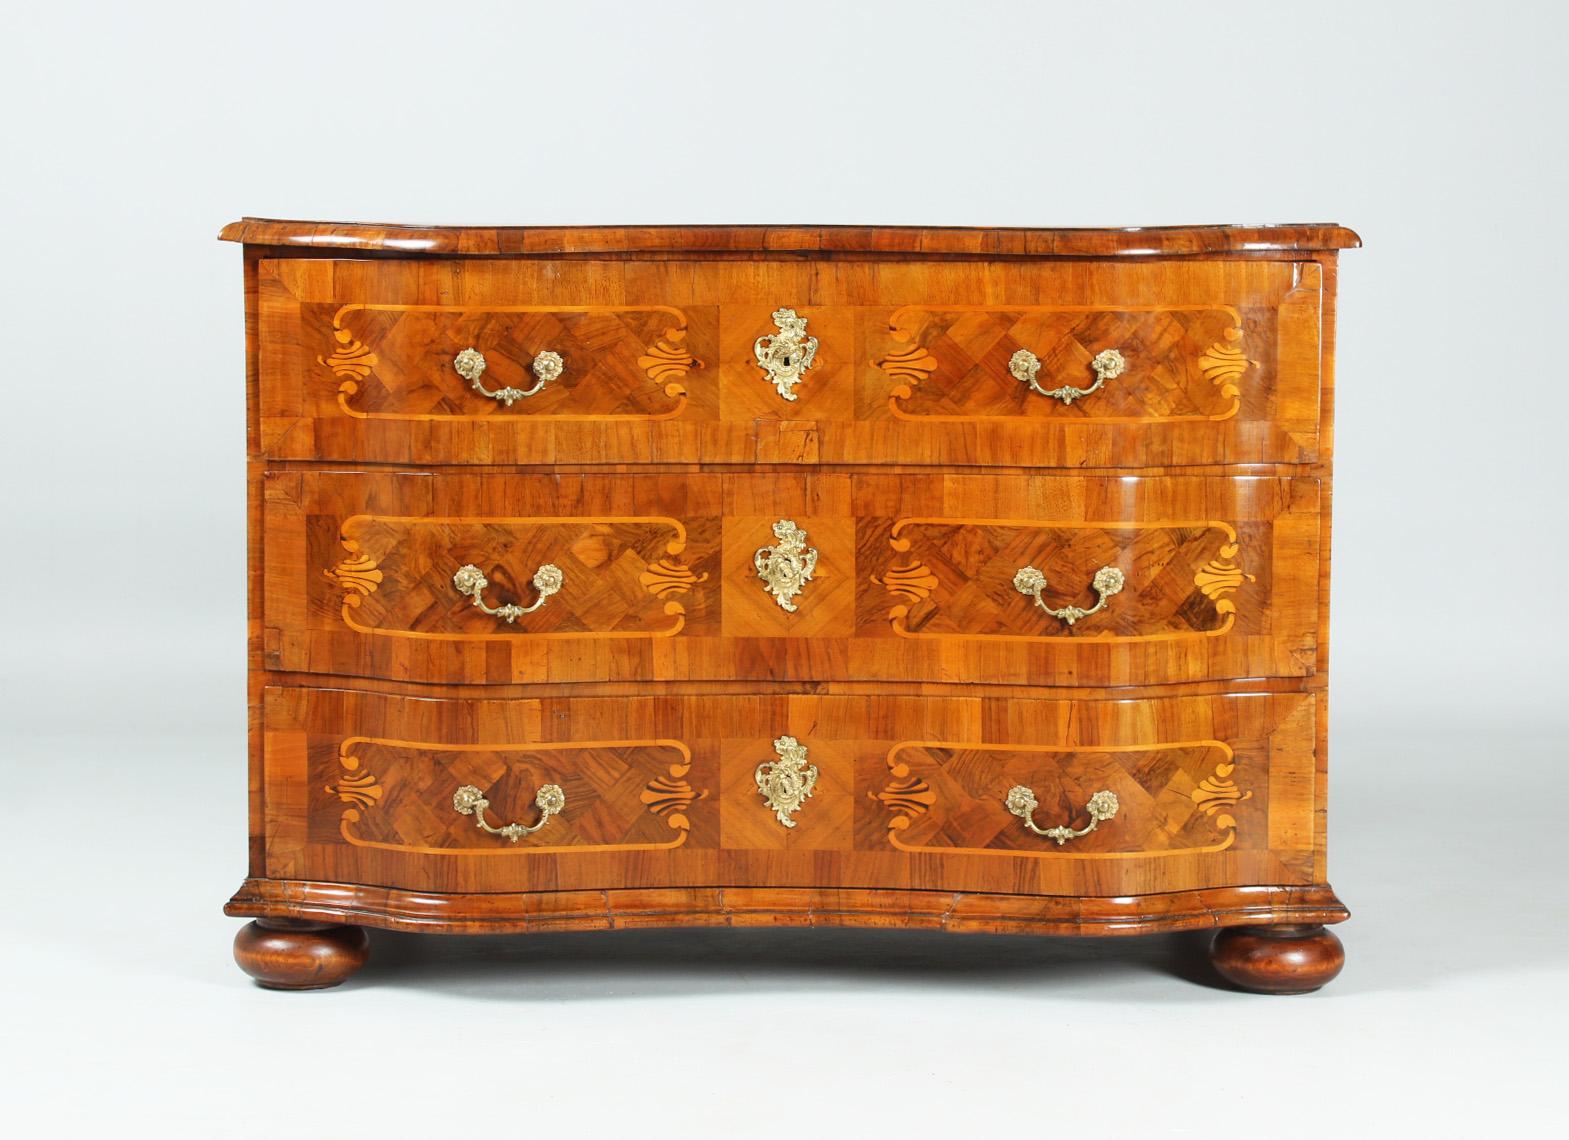 Antique Baroque chest of drawers with three drawers

Middle German
Walnut
Baroque around 1750

Dimensions: H x W x D: 80 x 117 x 66 cm

Description:
Beautiful and well-proportioned chest of drawers from the Middle German Baroque.

A